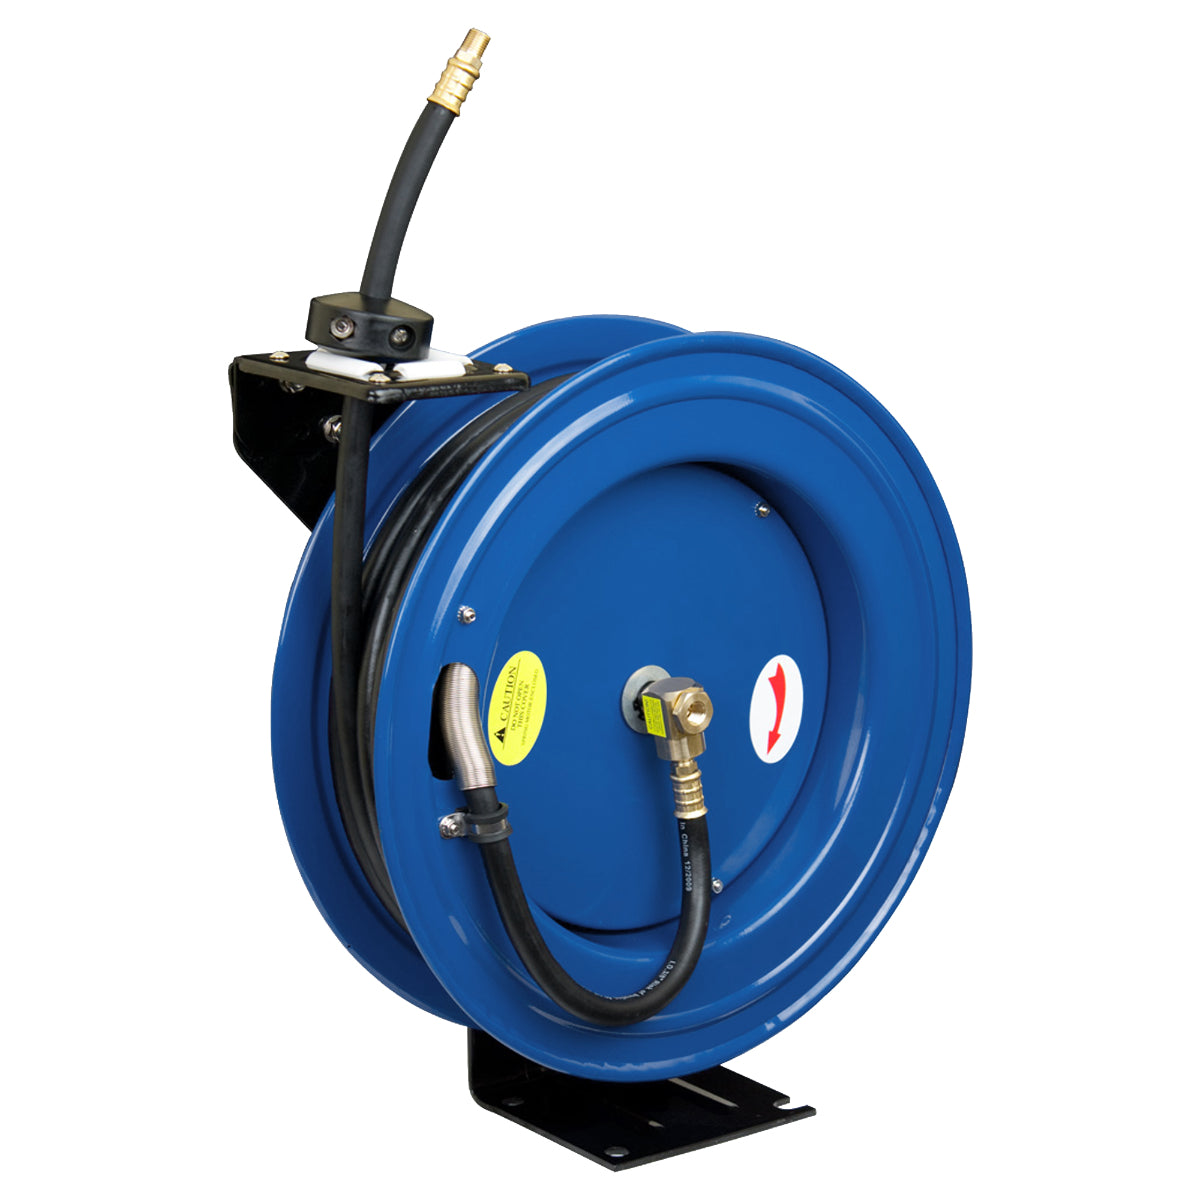 TOOL REVIEW - Good Year 50' x 3/8 Retractable Air Hose Reel 